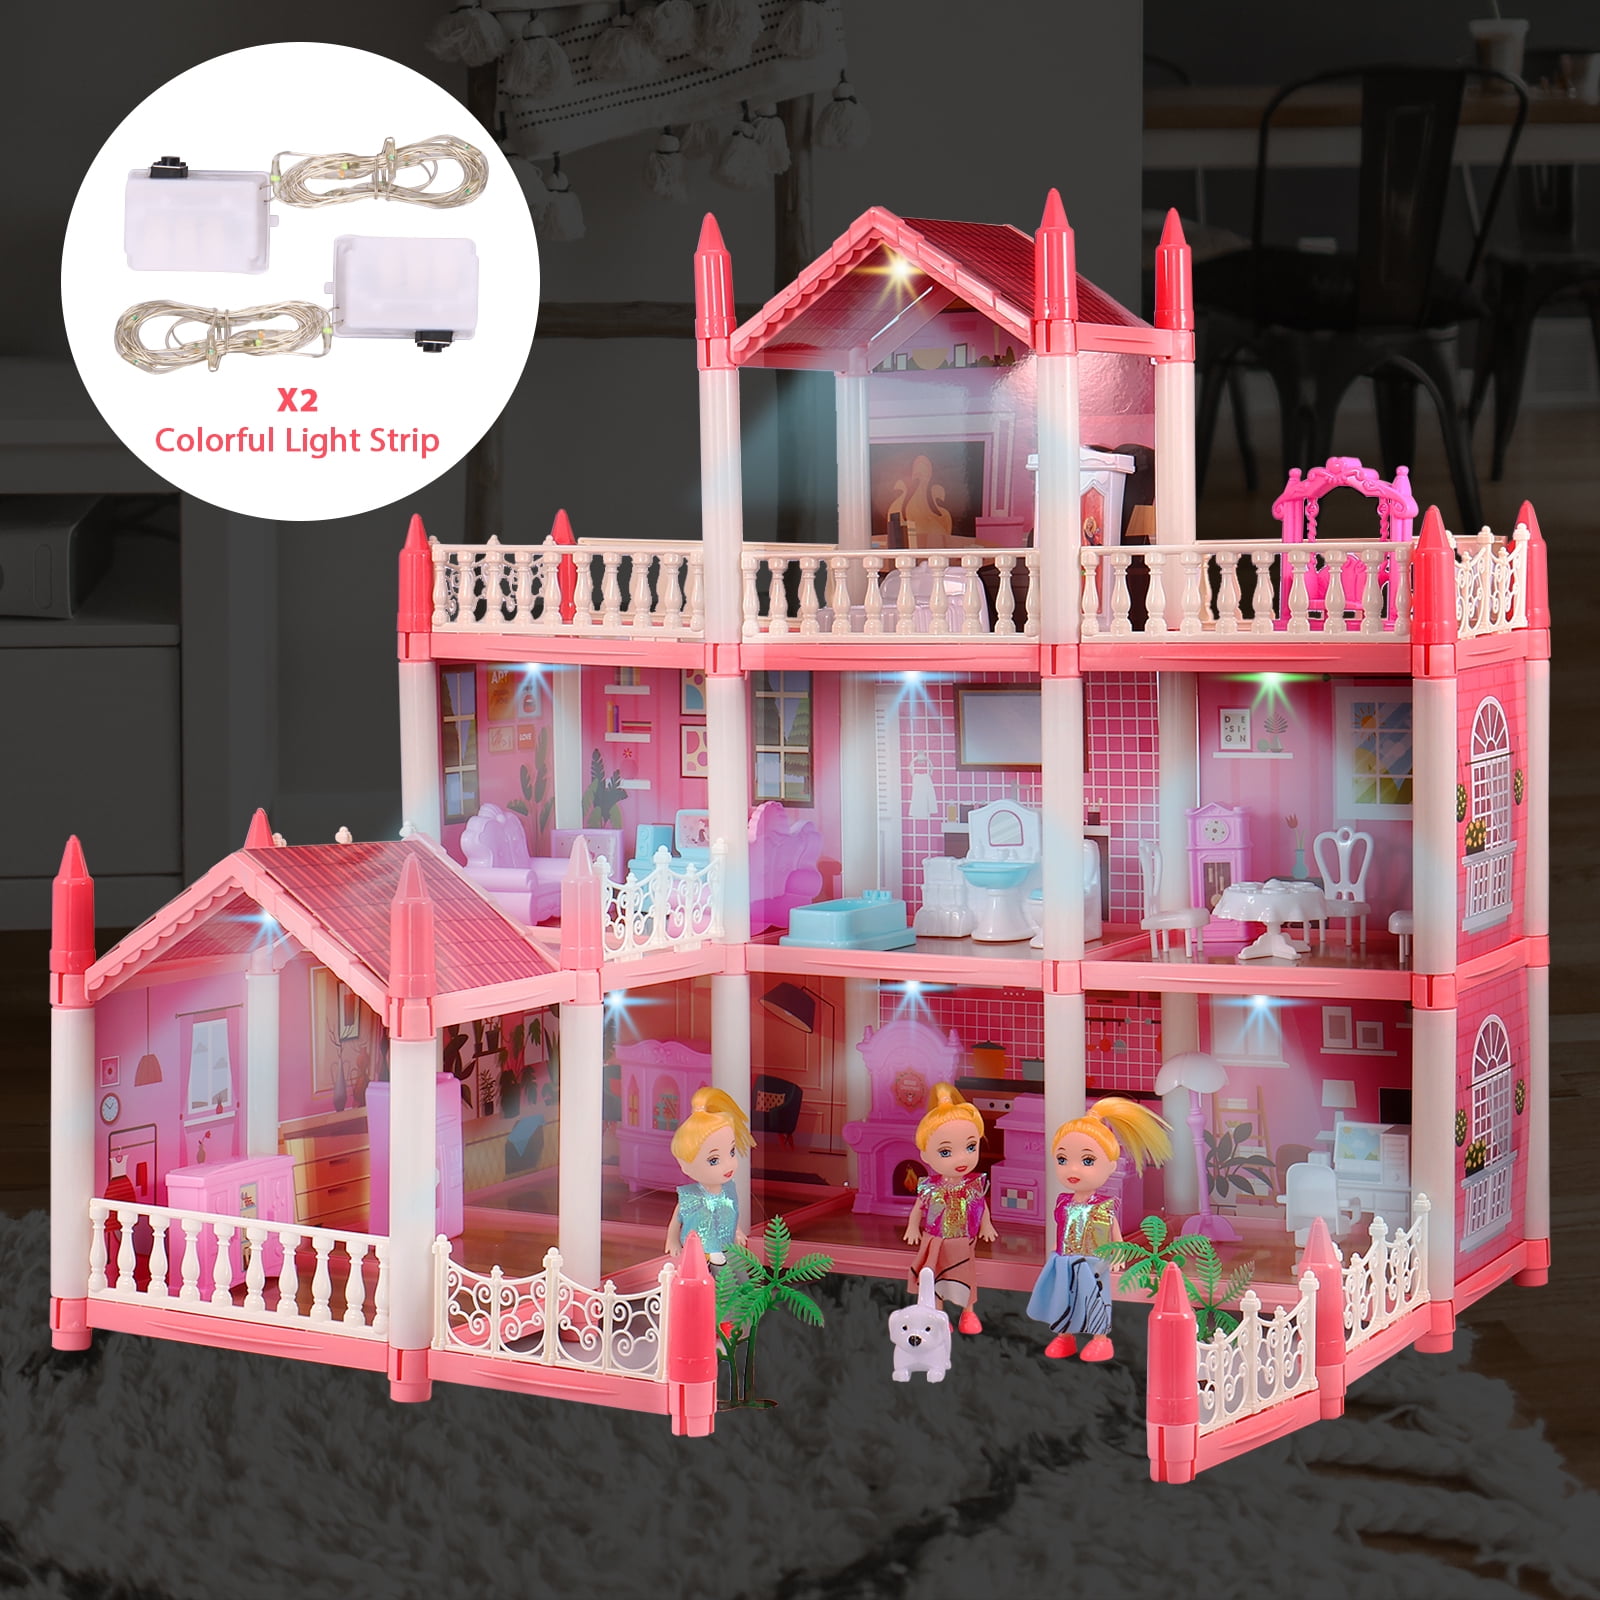 PERZOE Simulation Doll House Music And Light 3D Folding Early